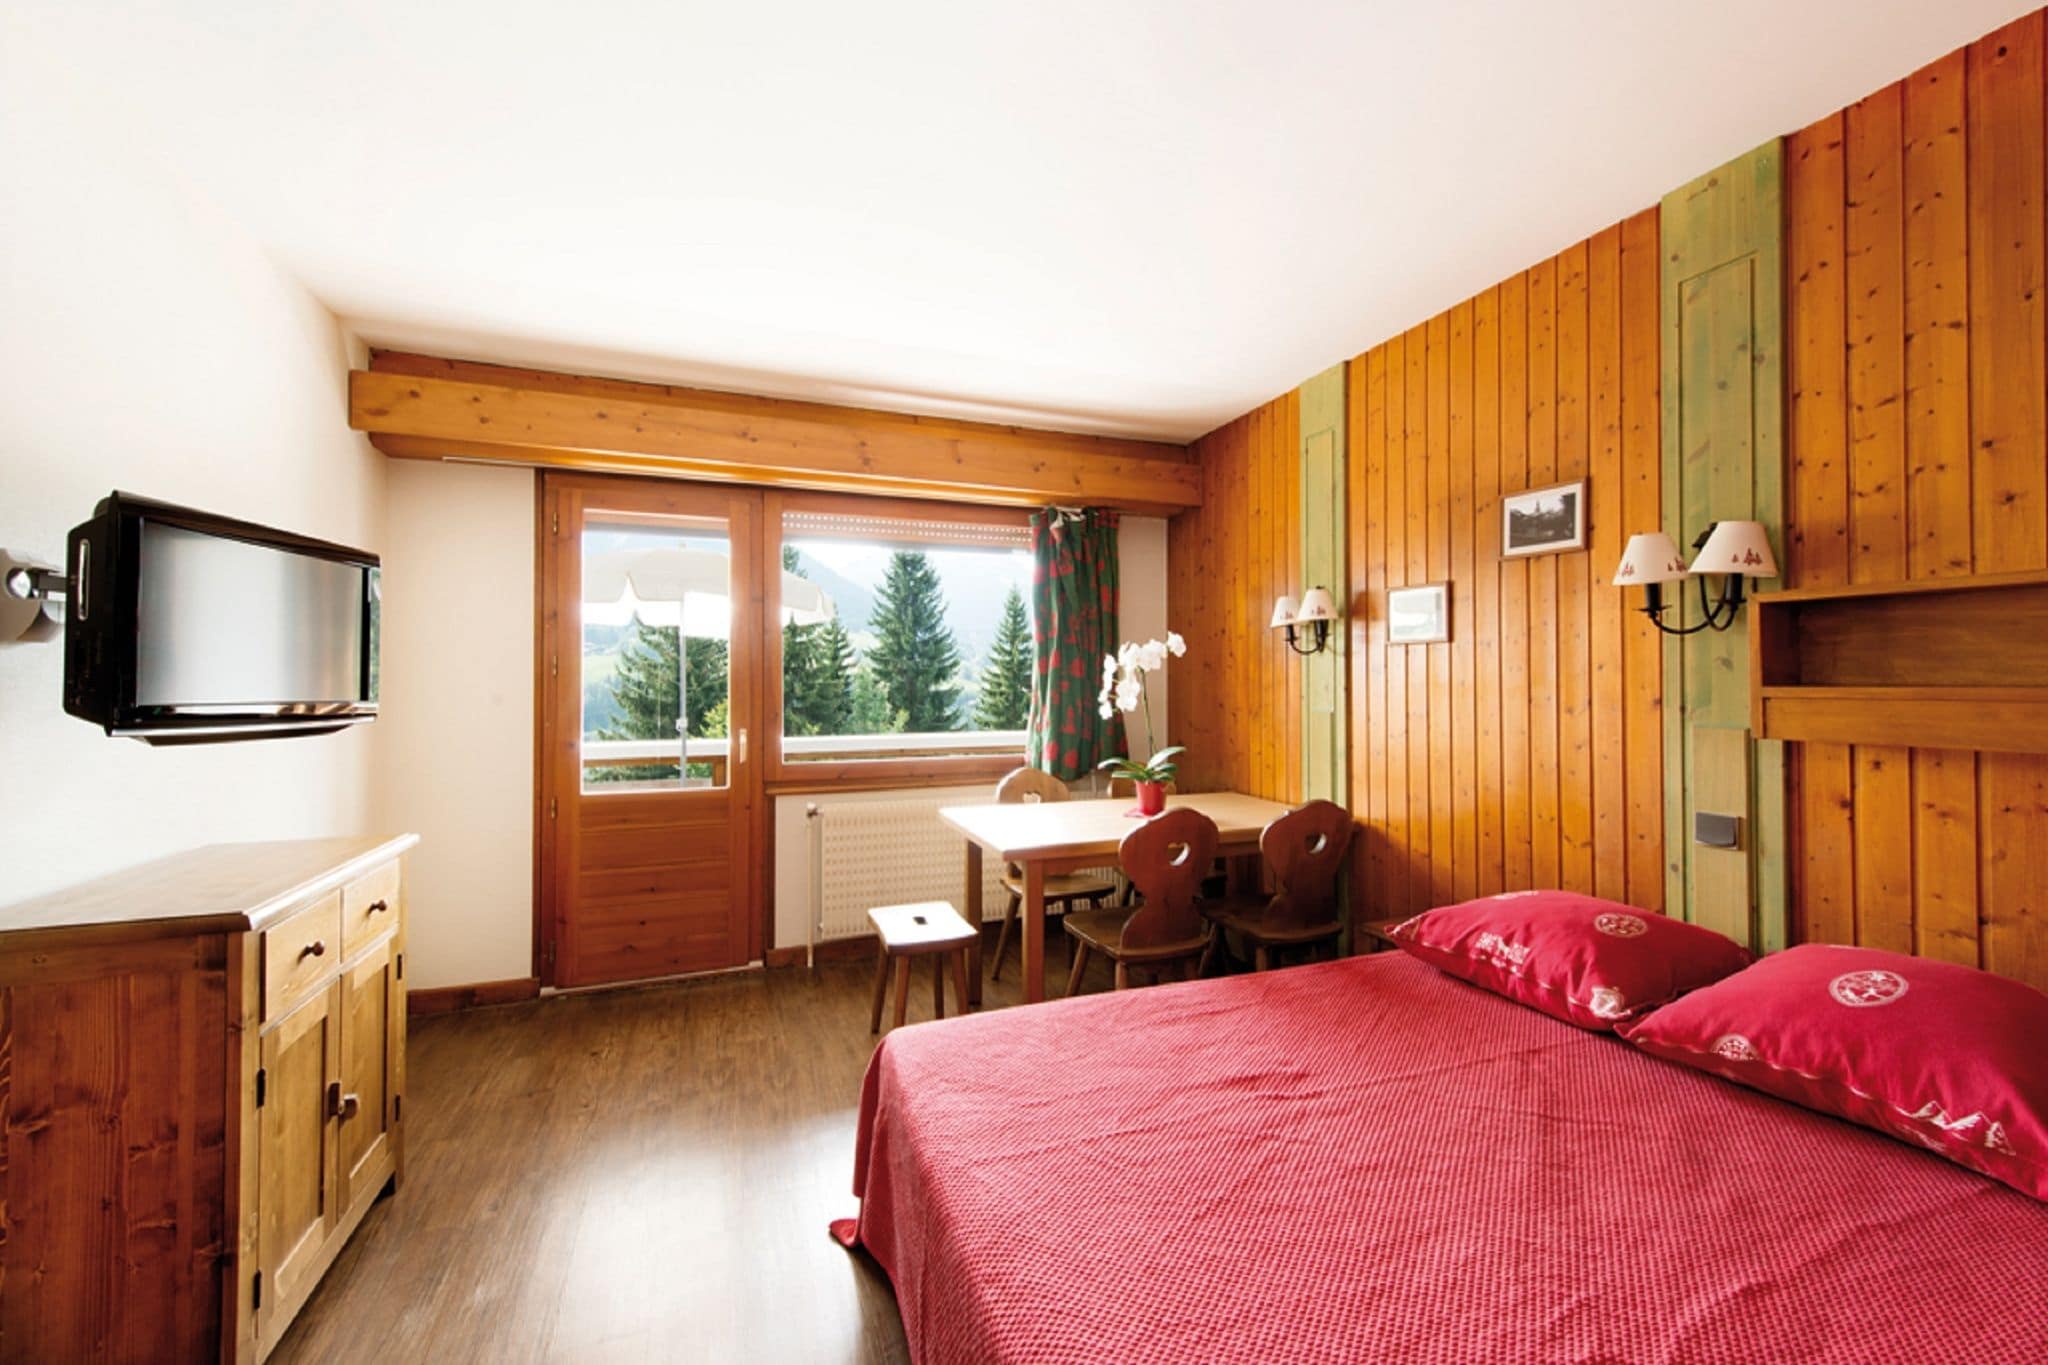 Rustic apartment in the authentic mountain village of Megève